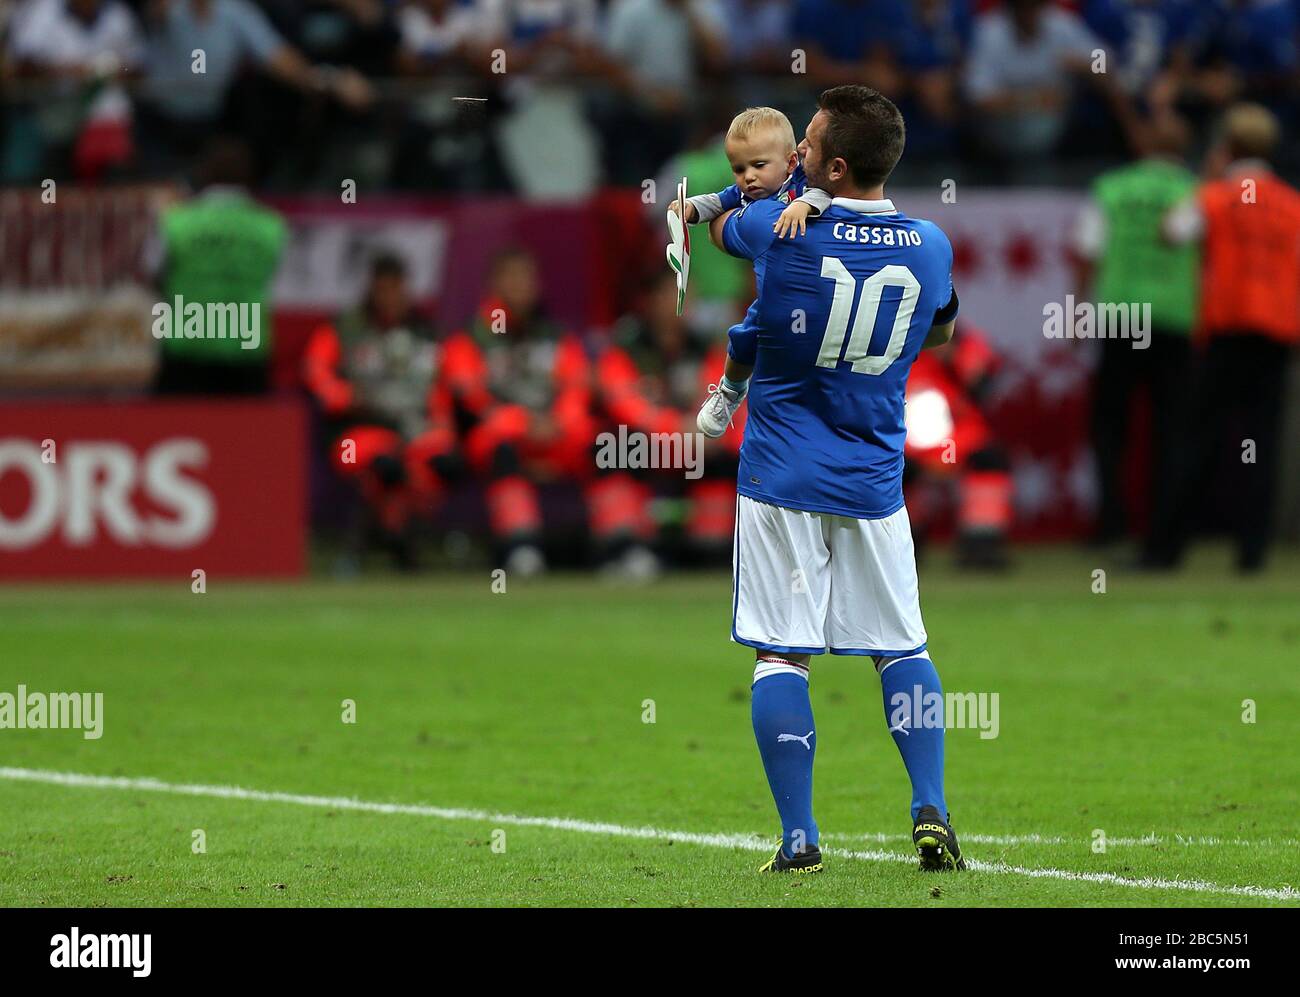 Italy's Antonio Cassano celebrates with his son Christopher on the pitch after the final whistle Stock Photo